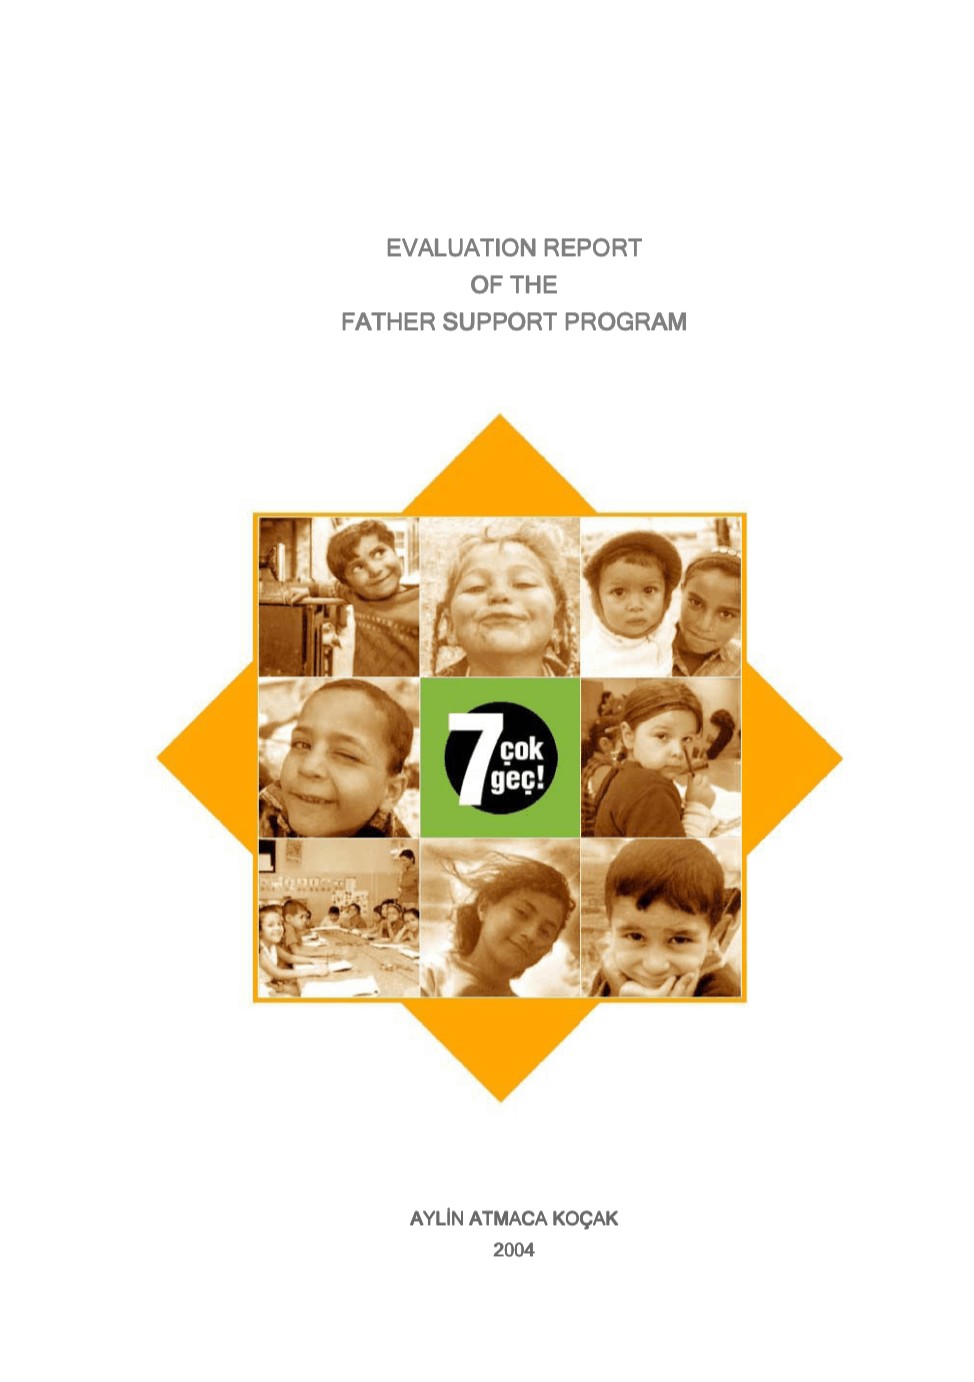 Evaluation Report of the Father Support Program